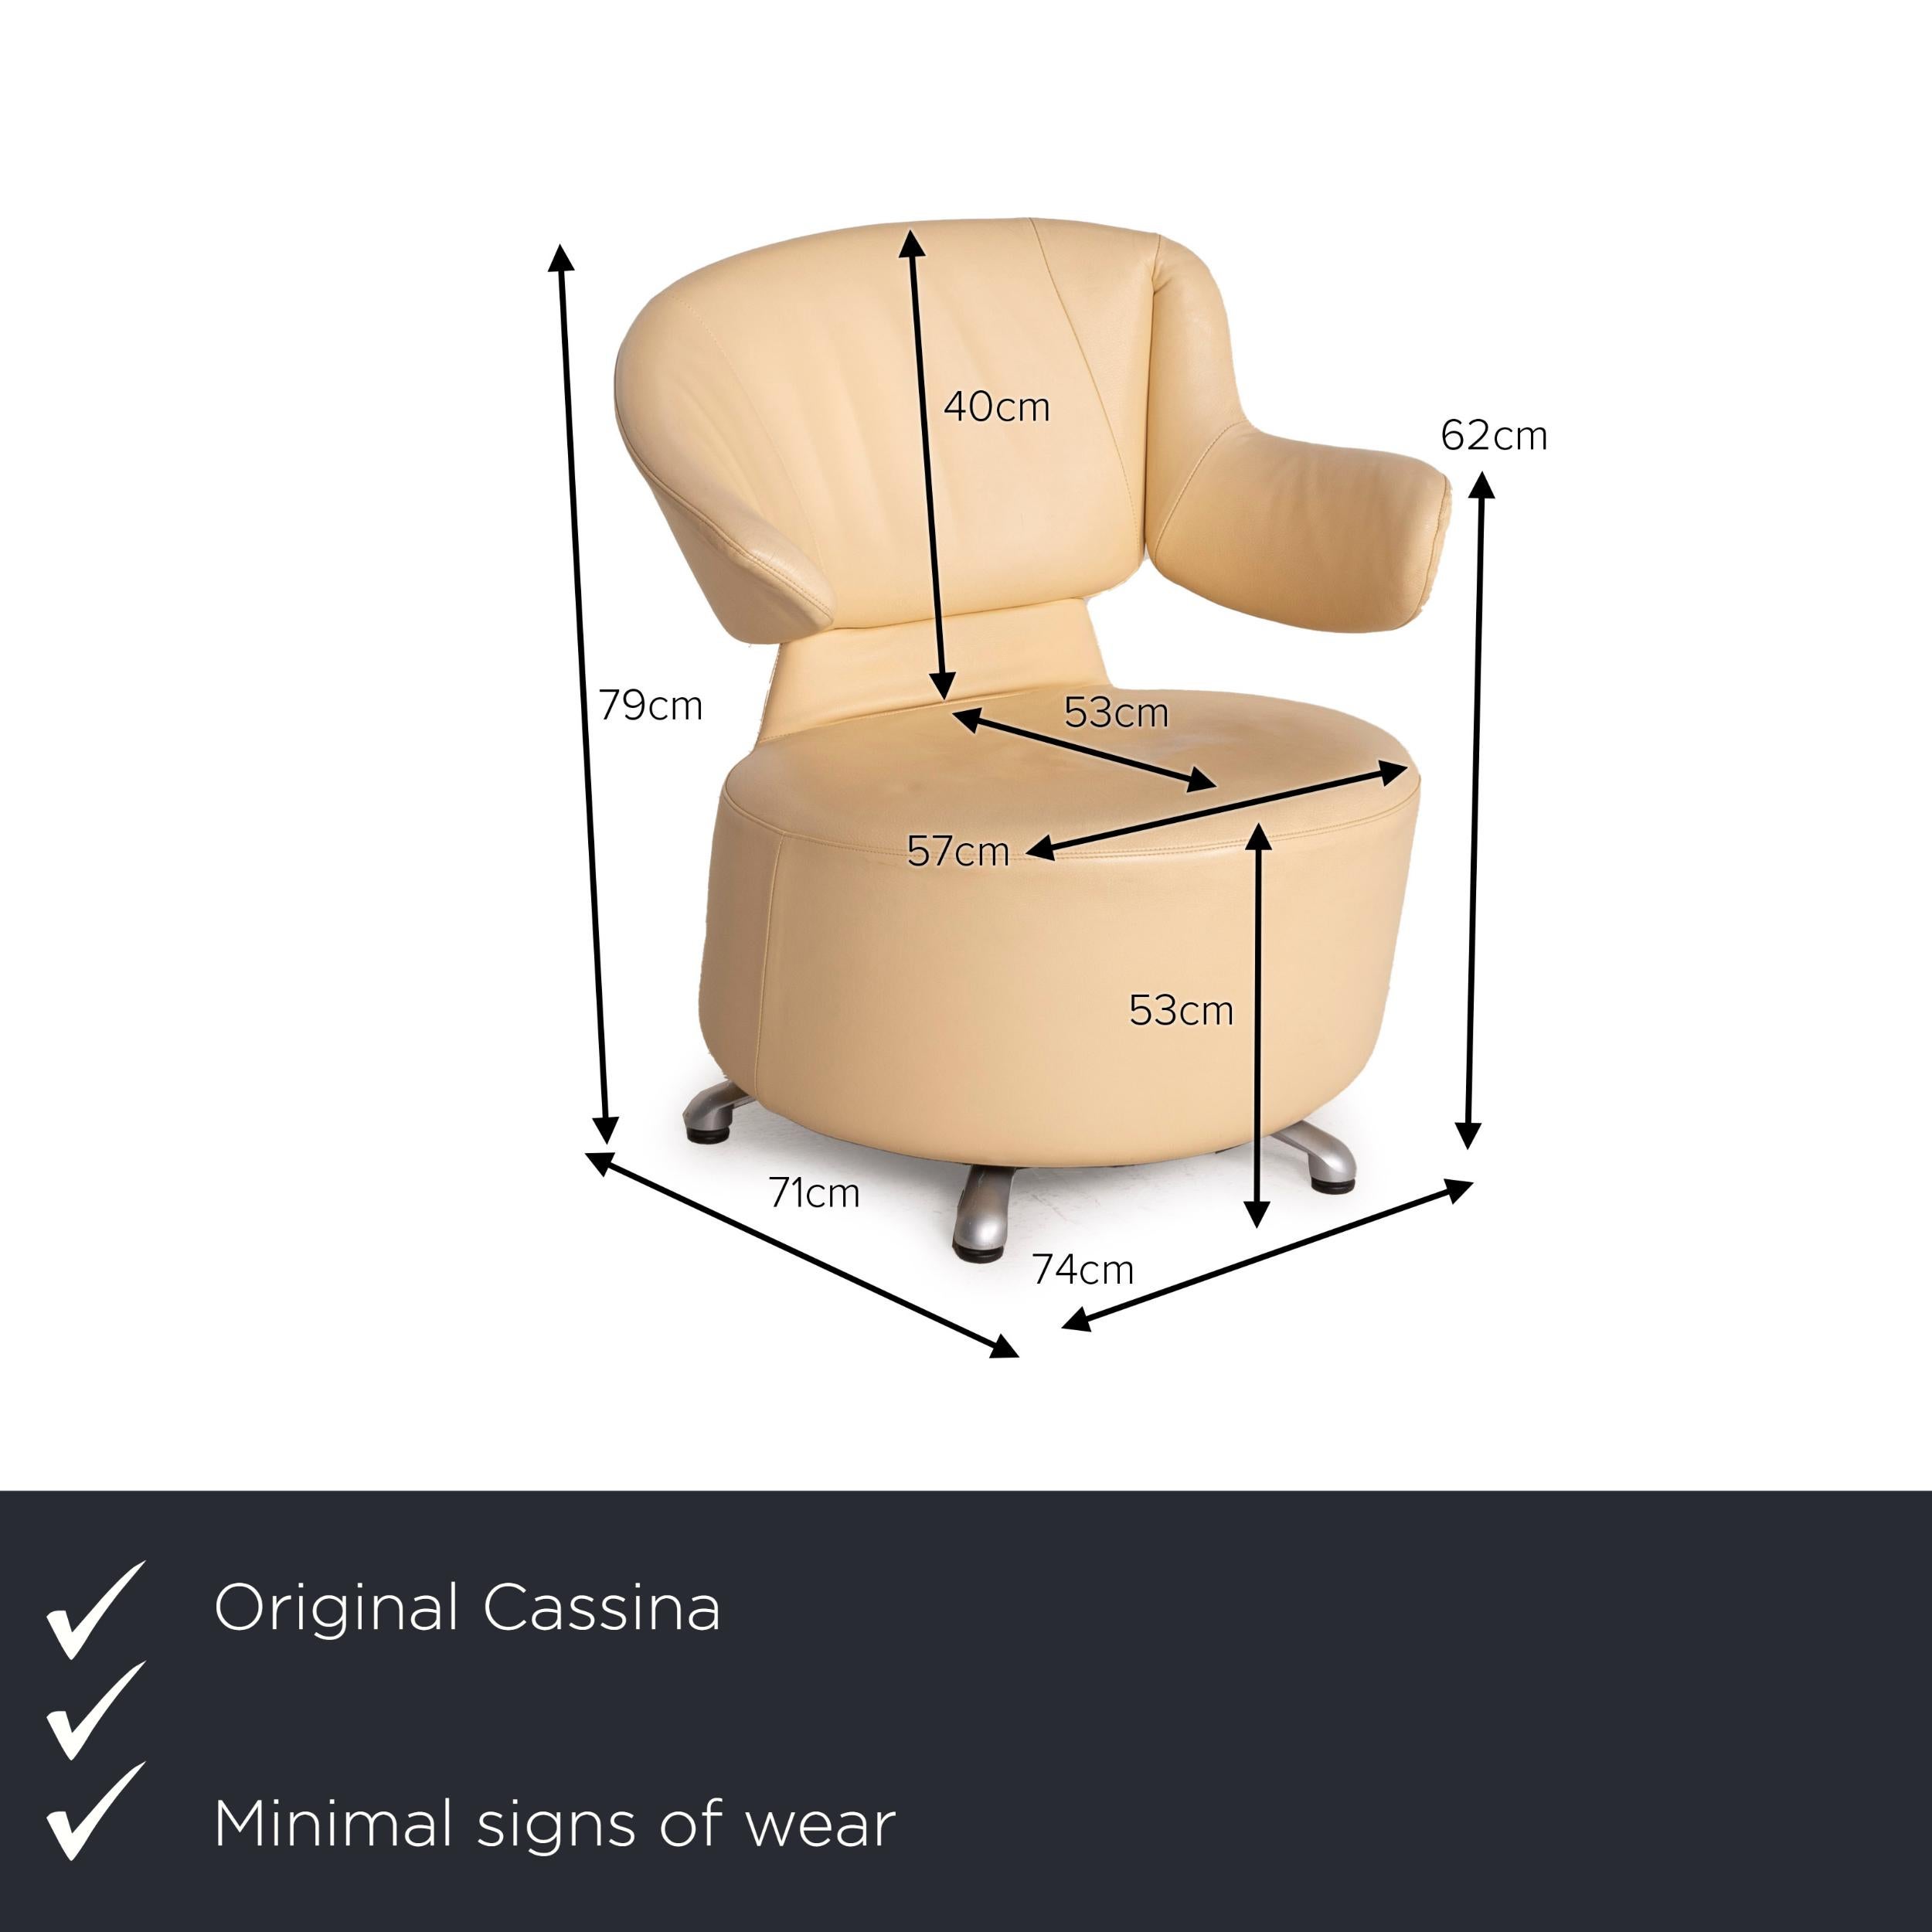 We present to you a Cassina K06 Aki Biki Canta leather armchair cream.

Product measurements in centimeters:

Depth 71
Width 74
Height 79
Seat height 53
Rest height 62
Seat depth 53
Seat width 57
Back height 40.
 
     
 